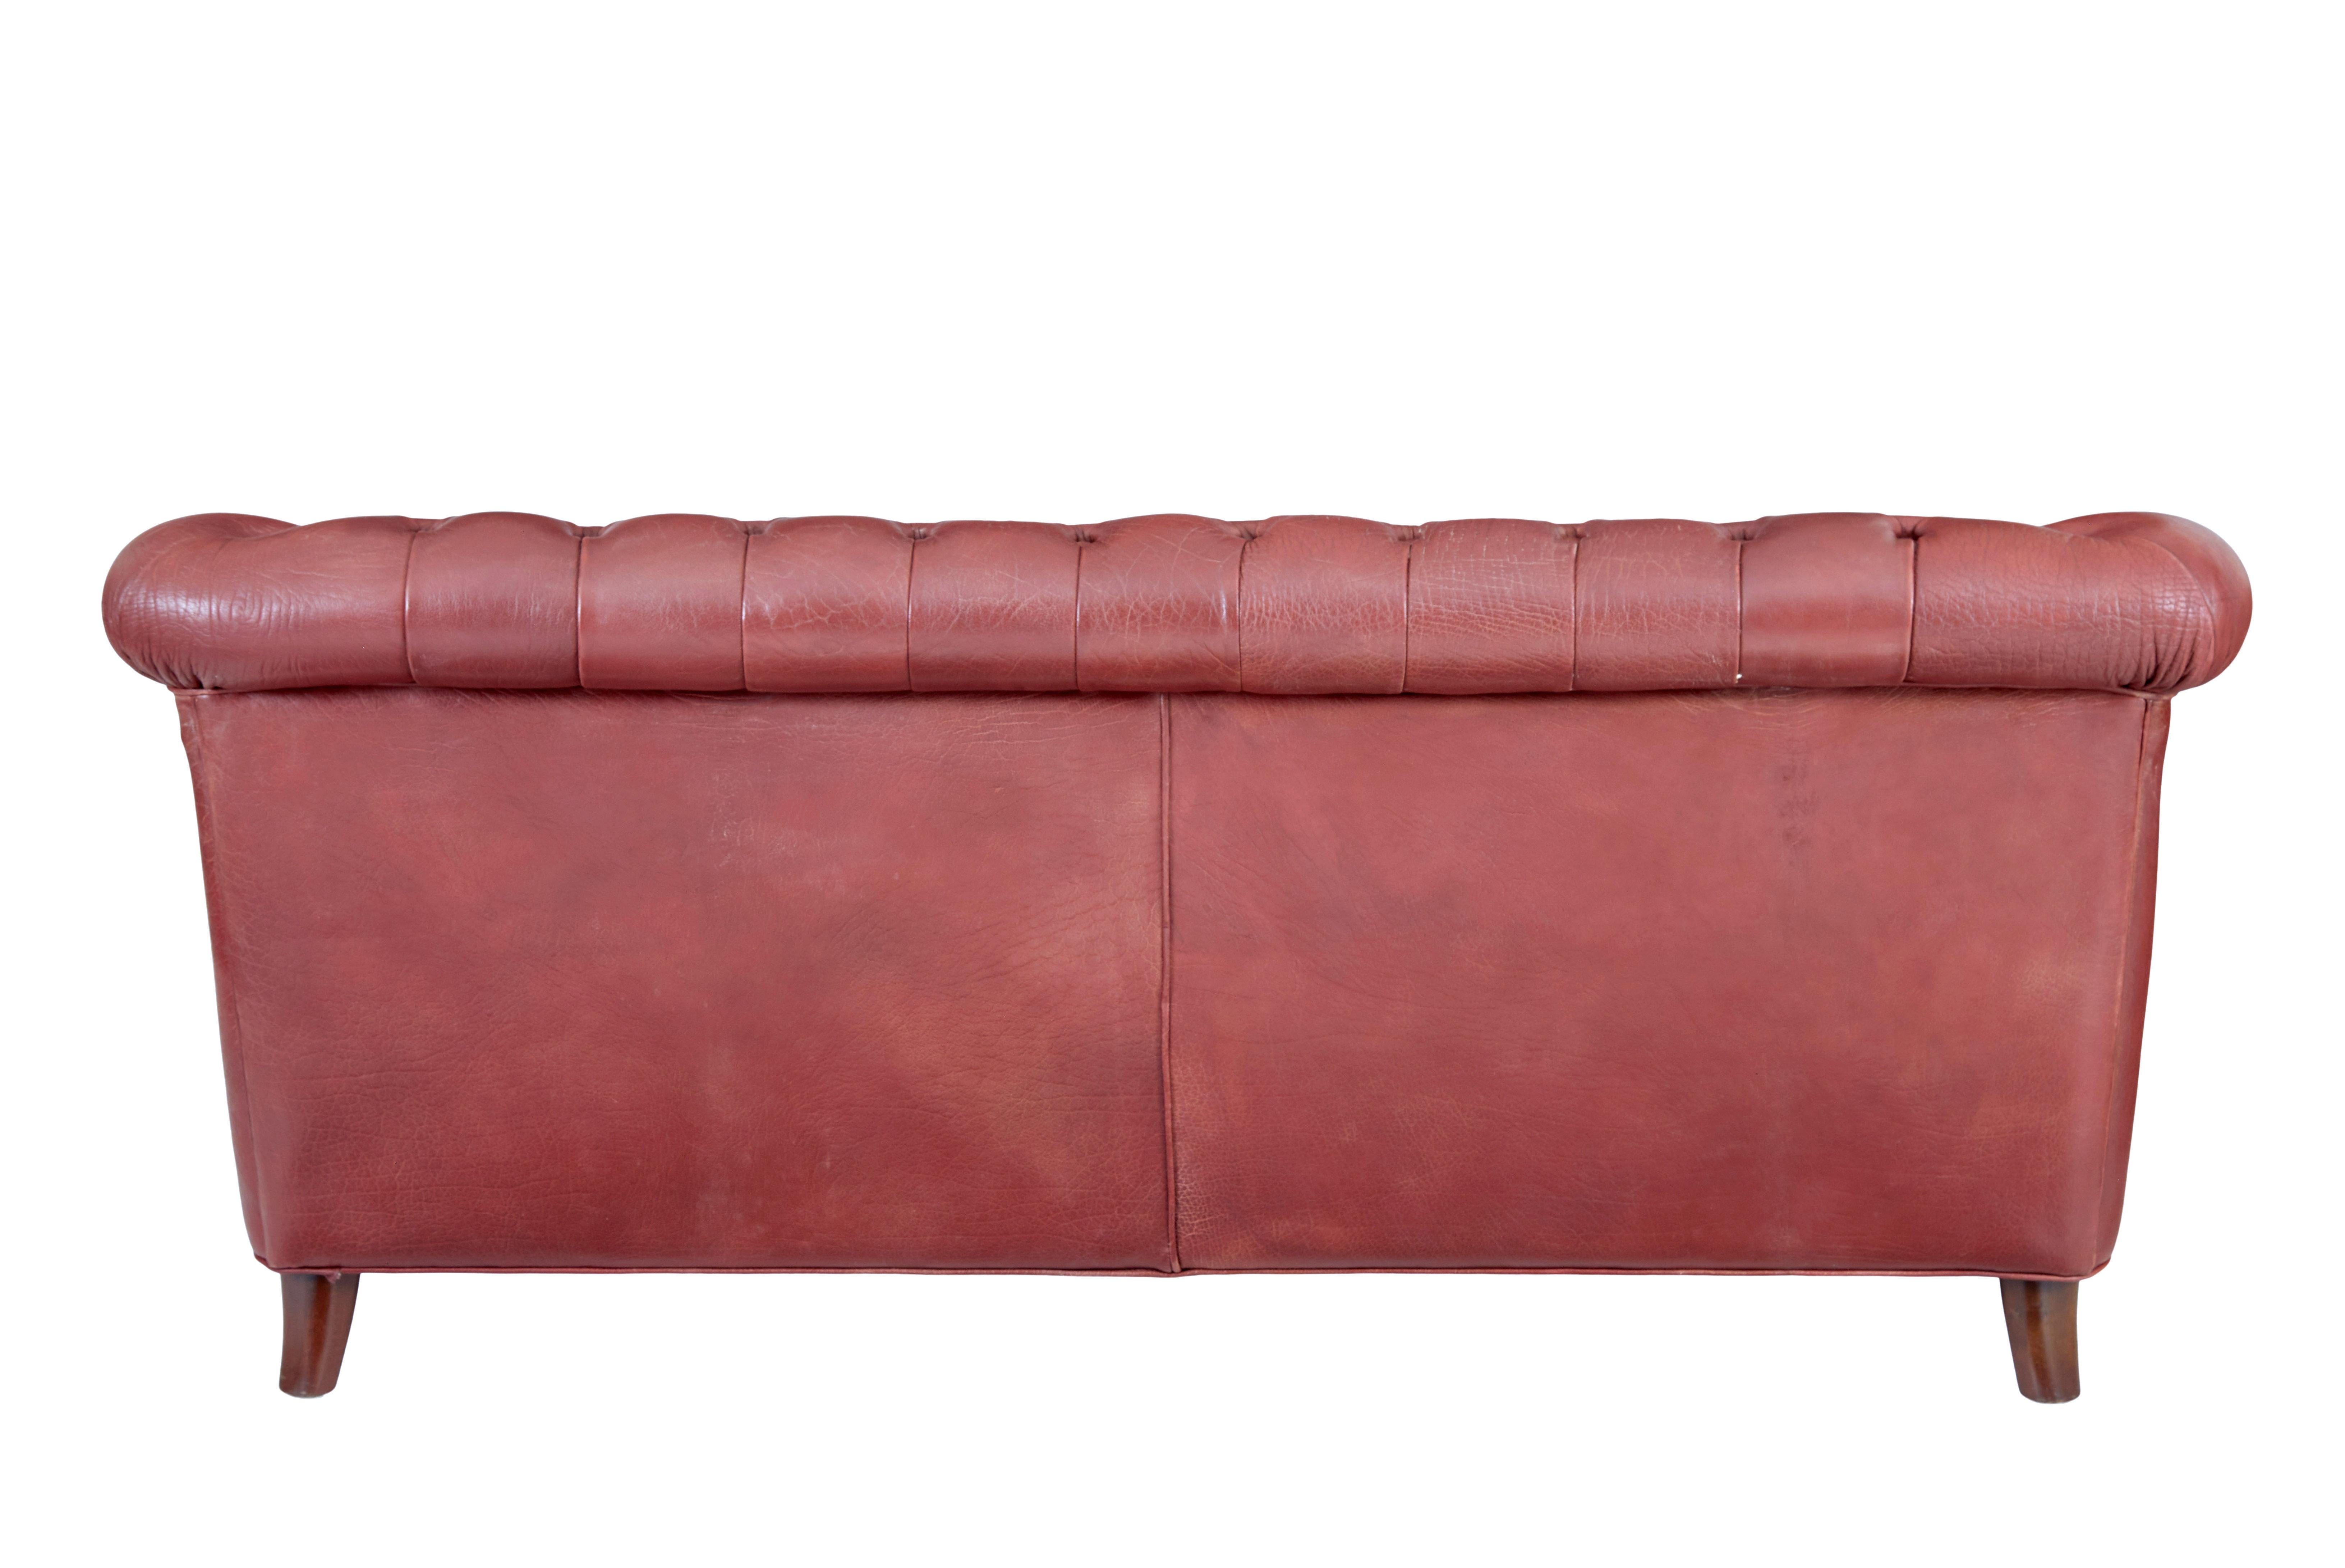 Pair of mid 20th century leather Chesterfield sofas In Good Condition For Sale In Debenham, Suffolk